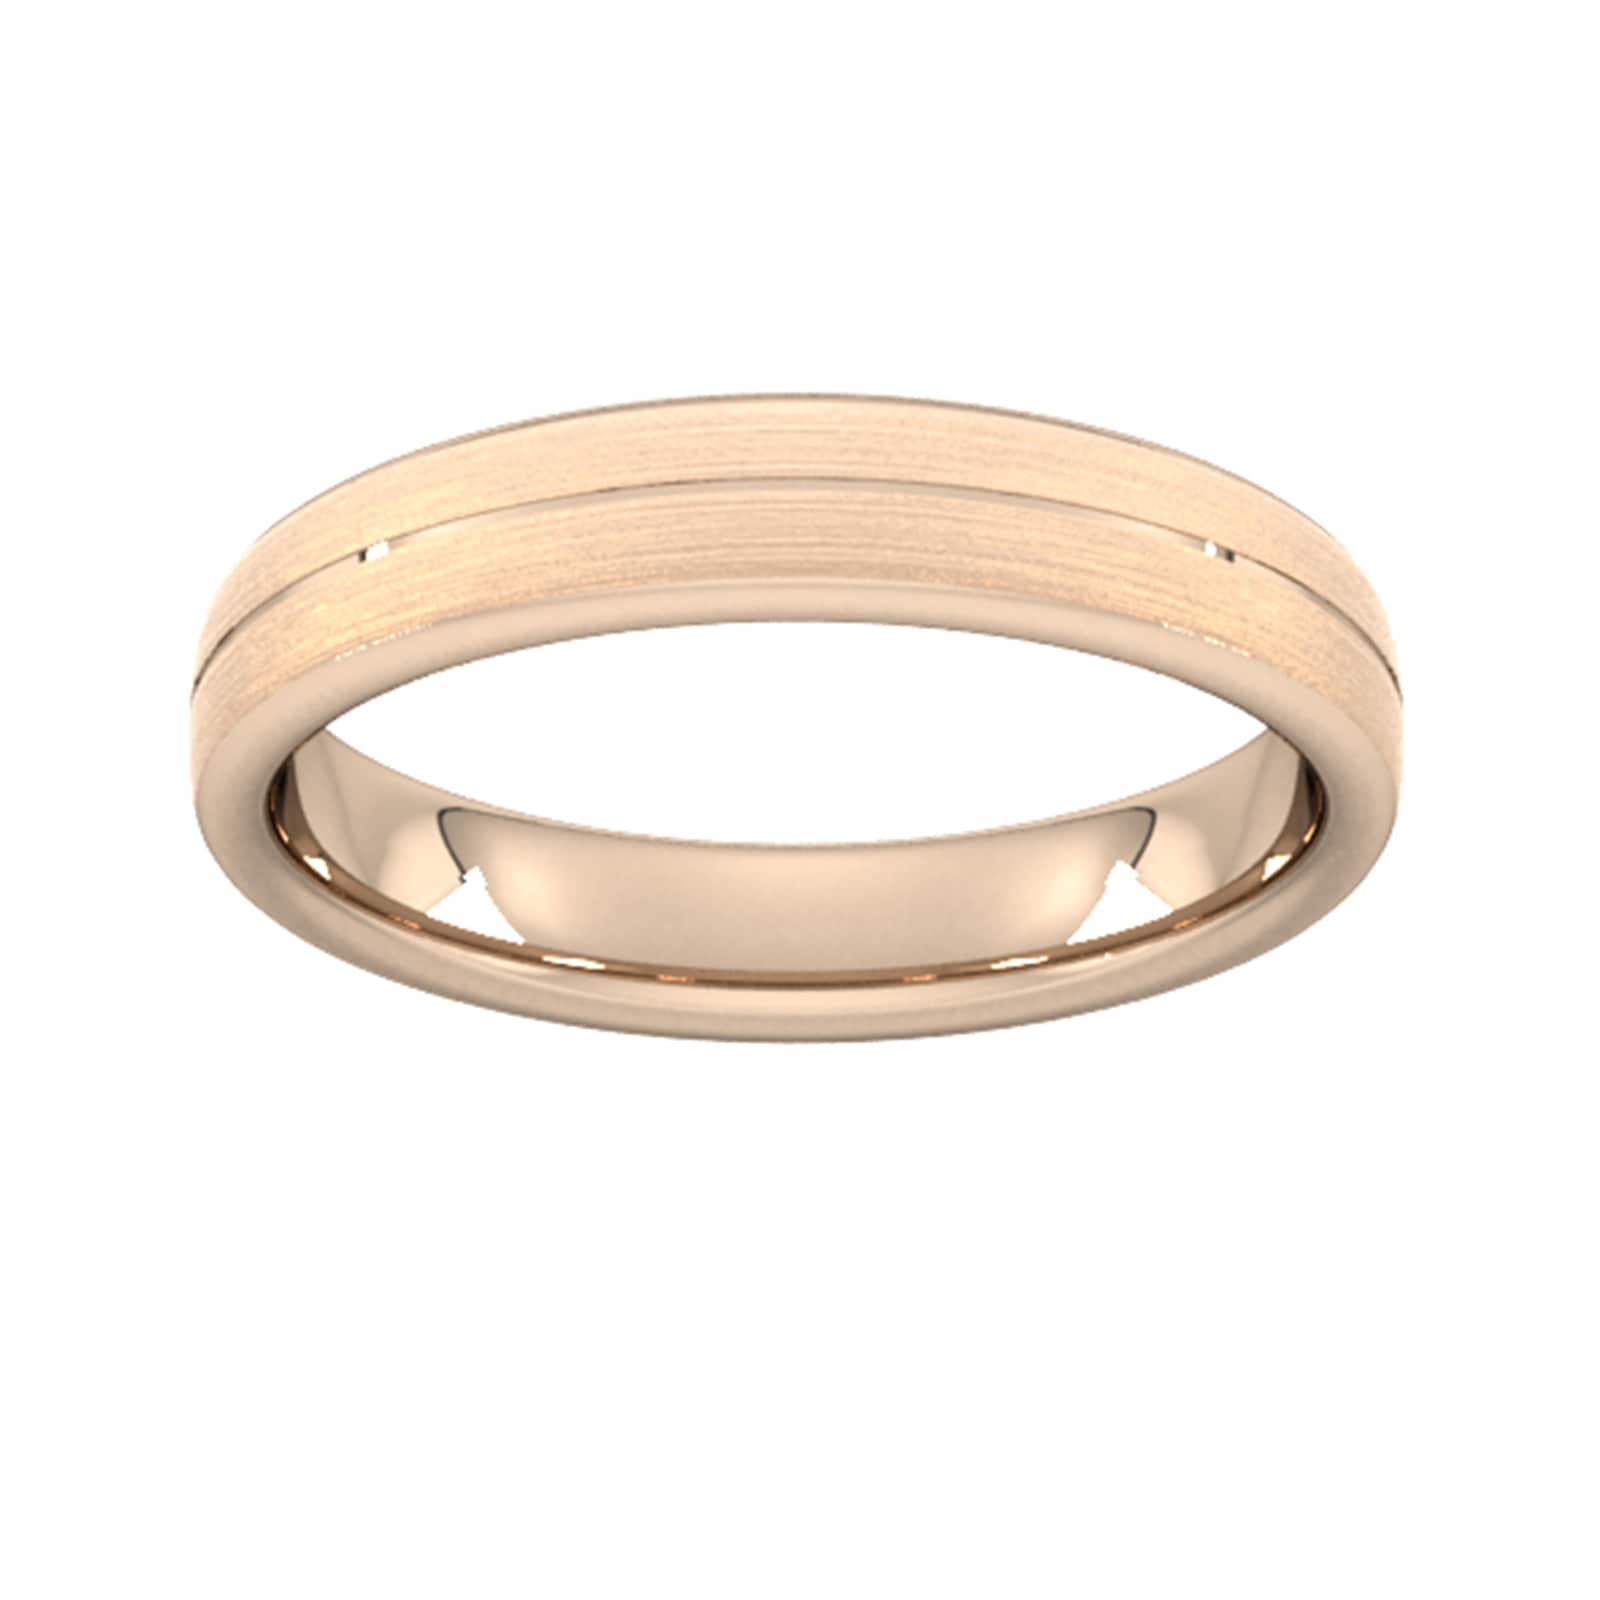 4mm Slight Court Heavy Centre Groove With Chamfered Edge Wedding Ring In 9 Carat Rose Gold - Ring Size O